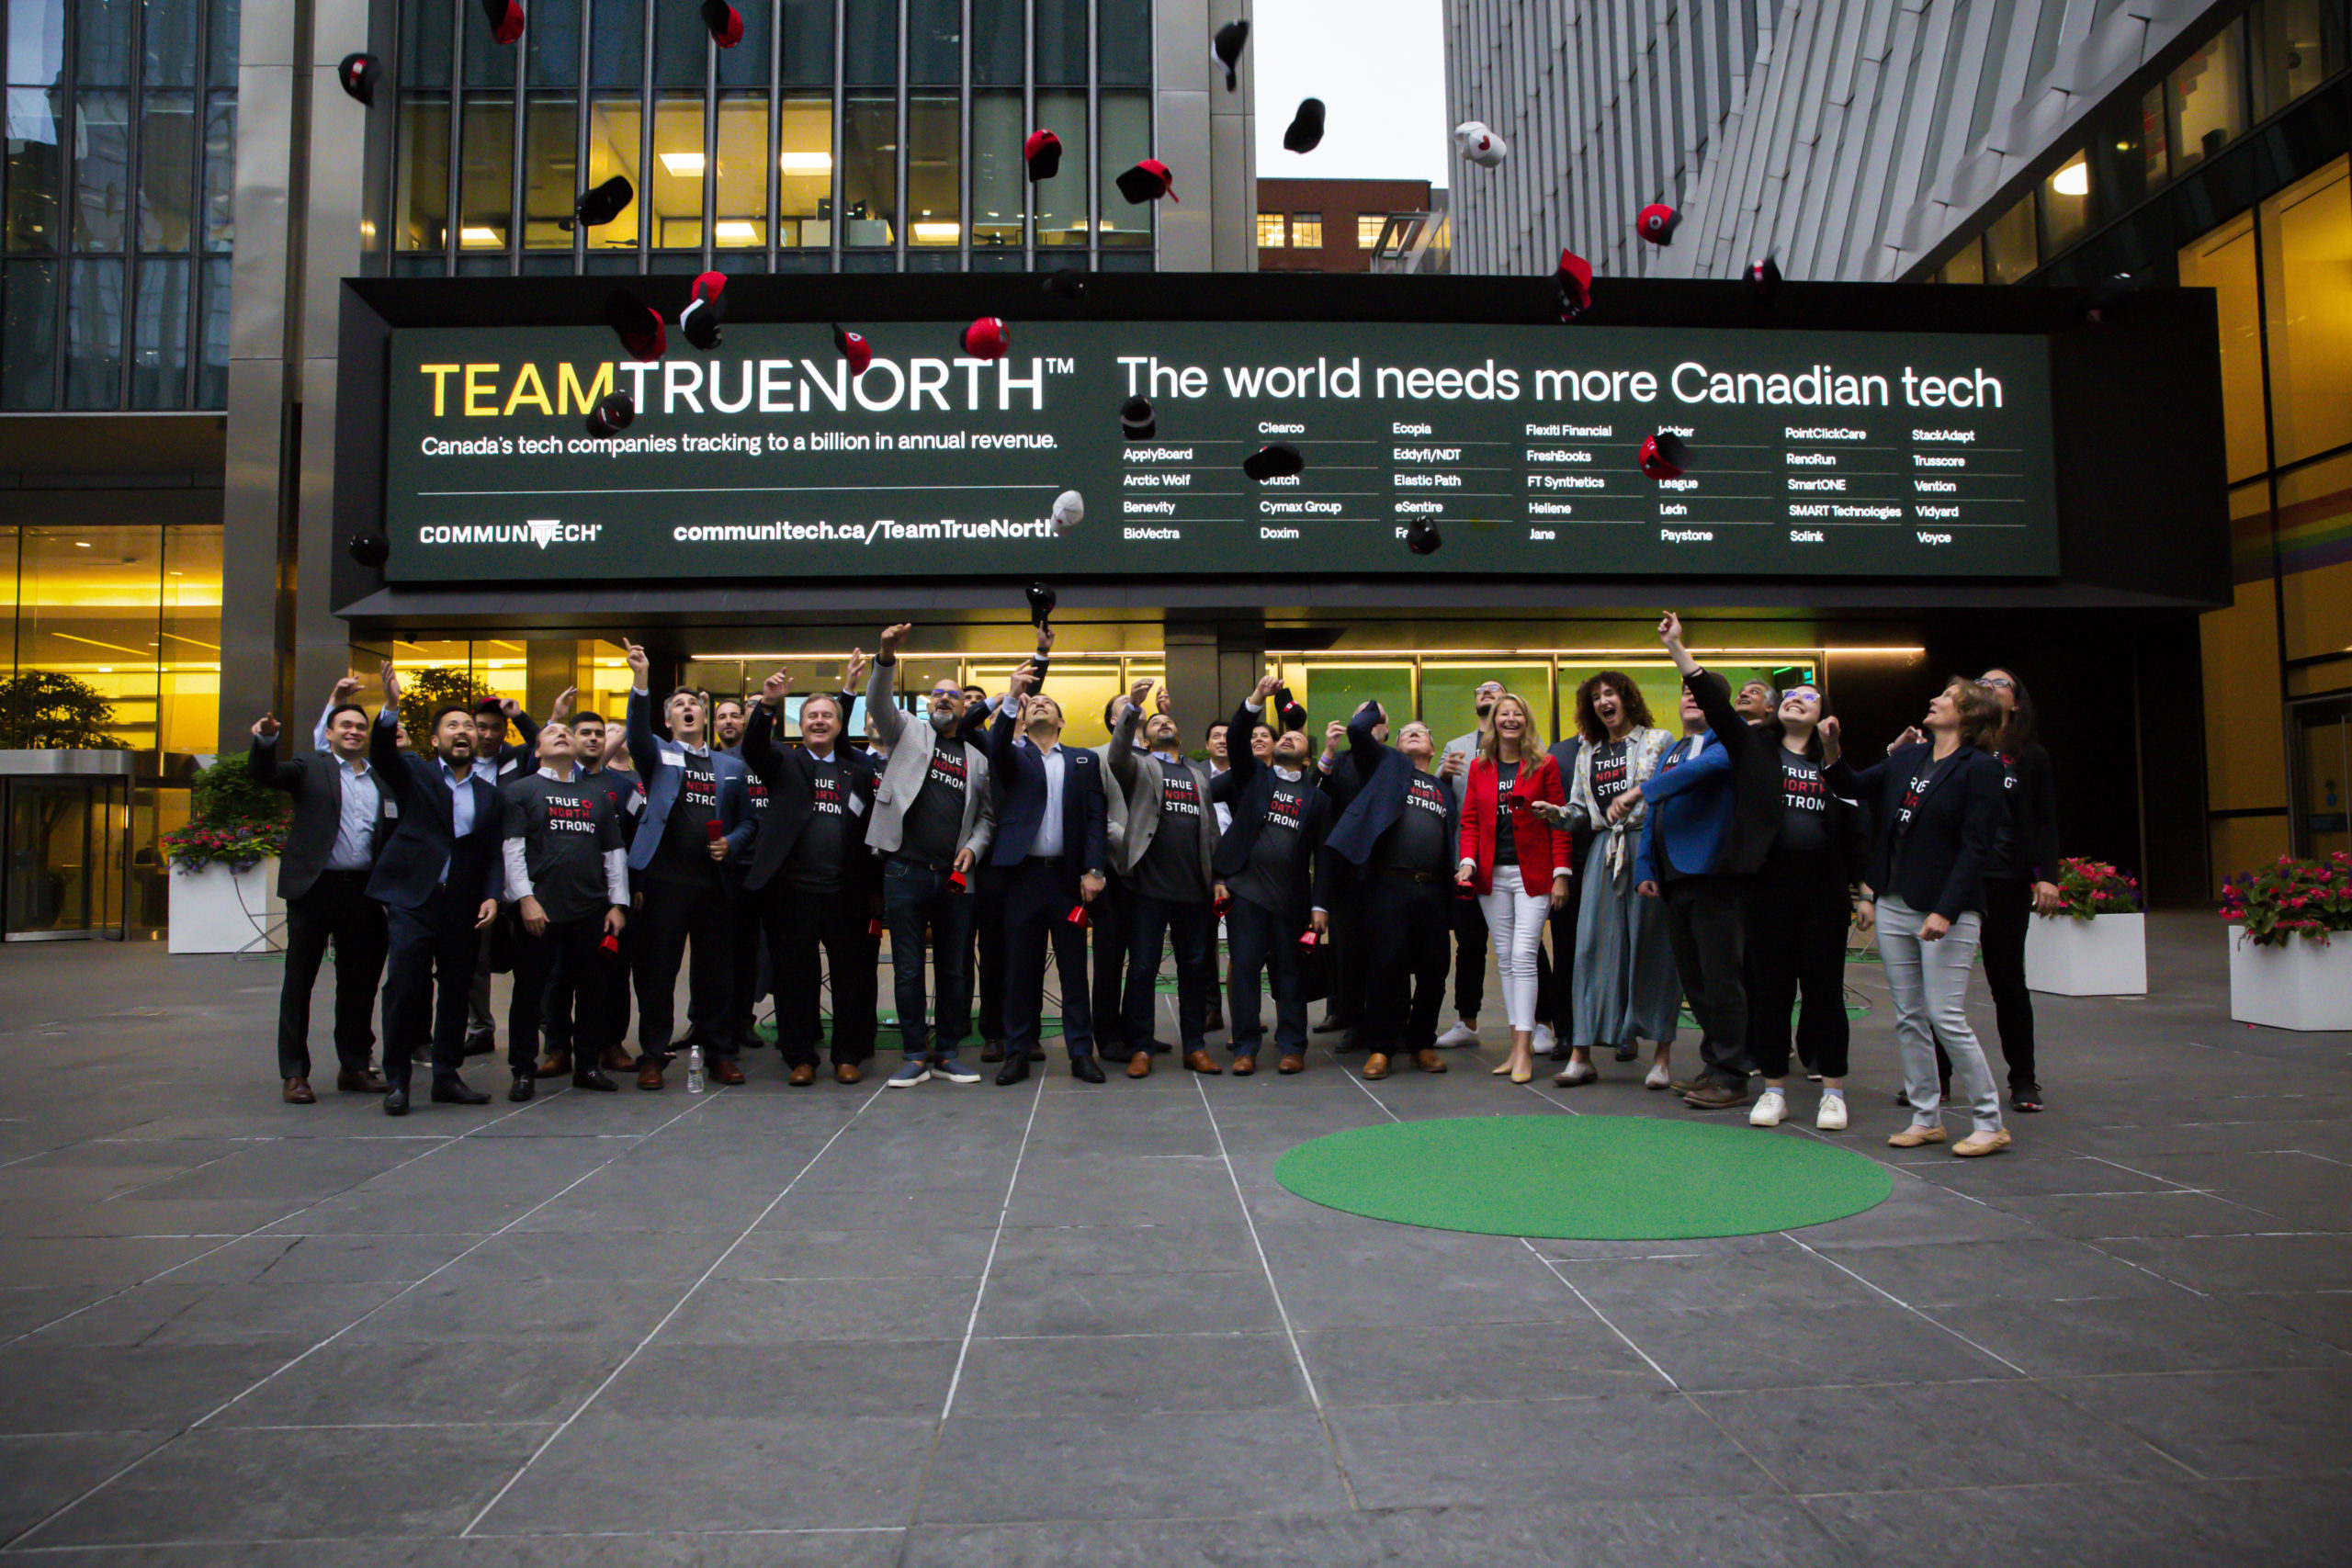 Paystone employees standing in front of Team True North celebrating.